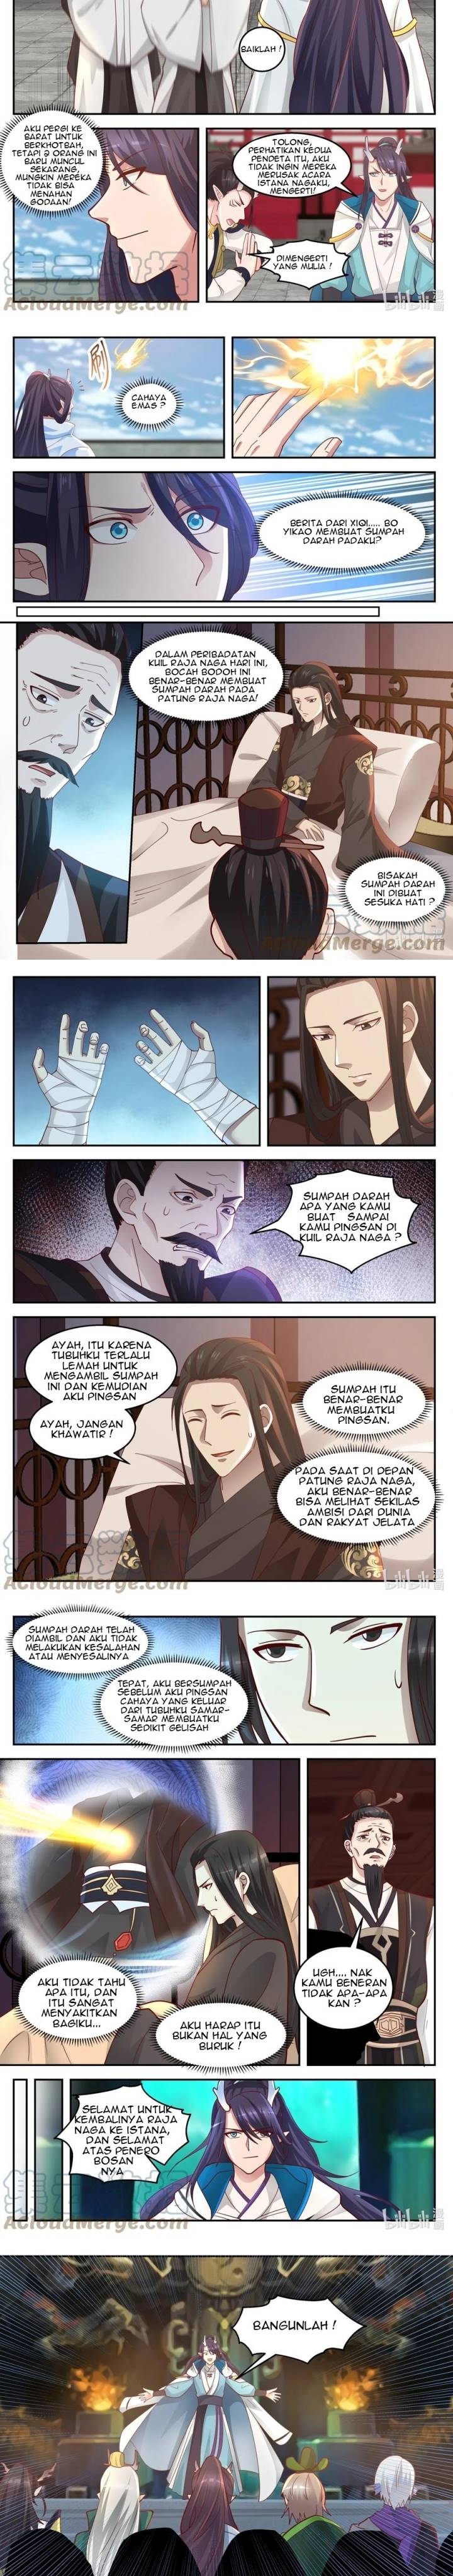 Dragon Throne Chapter 128